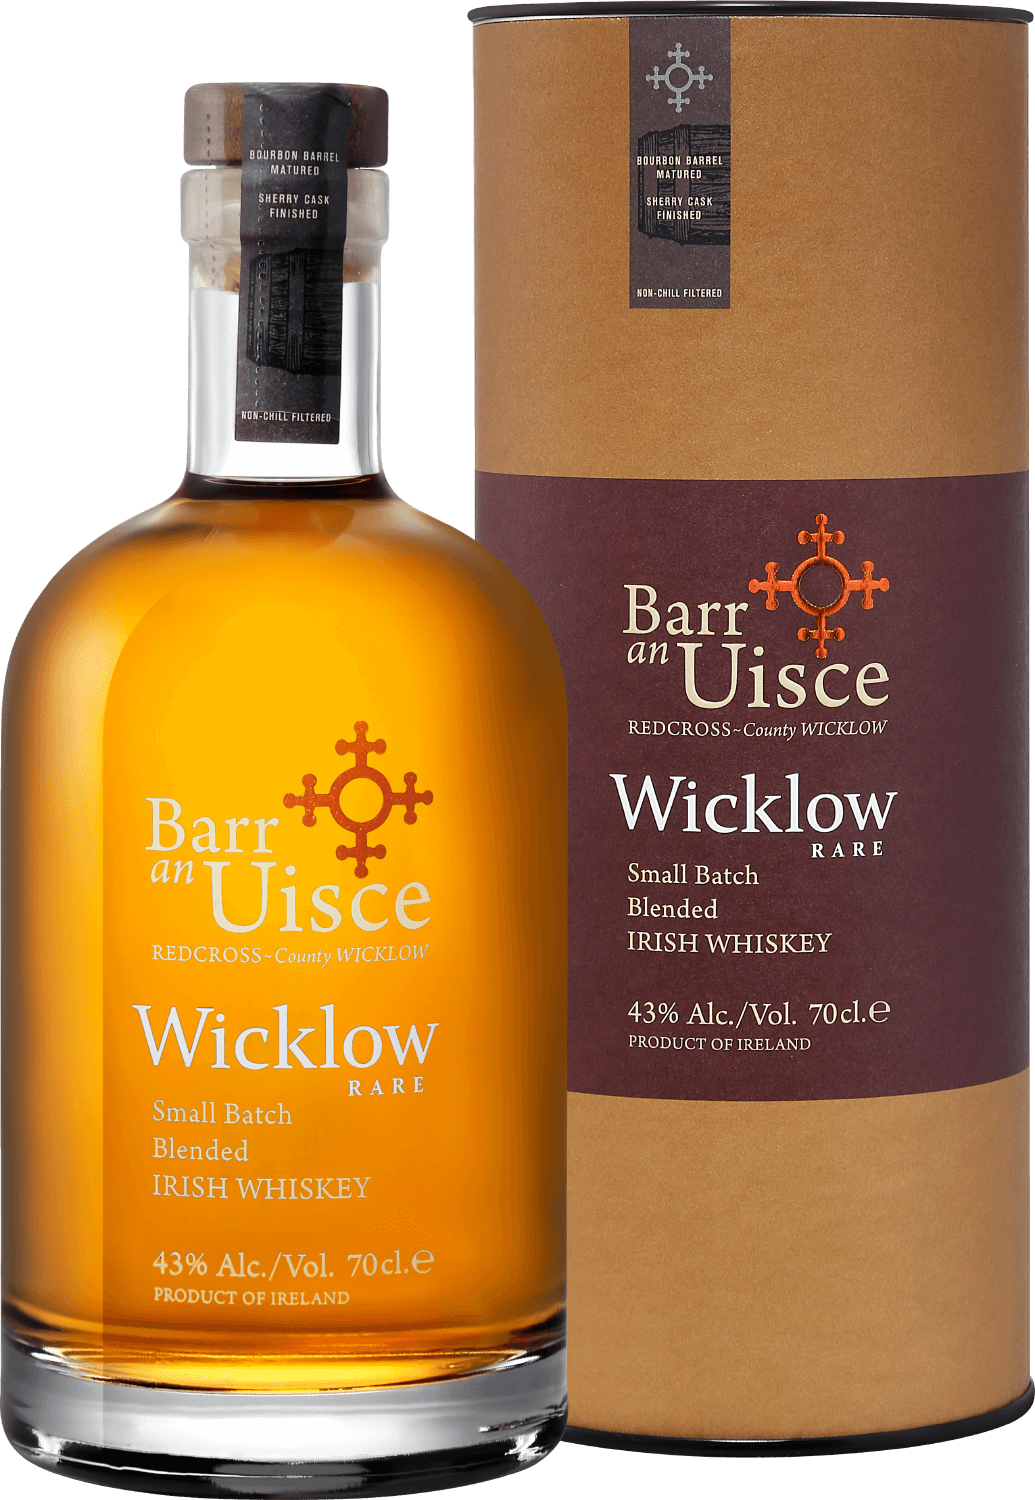 Barr an Uisce Wicklow Rare Small Batch Blended Irish Whiskey 4 YO (gift box)